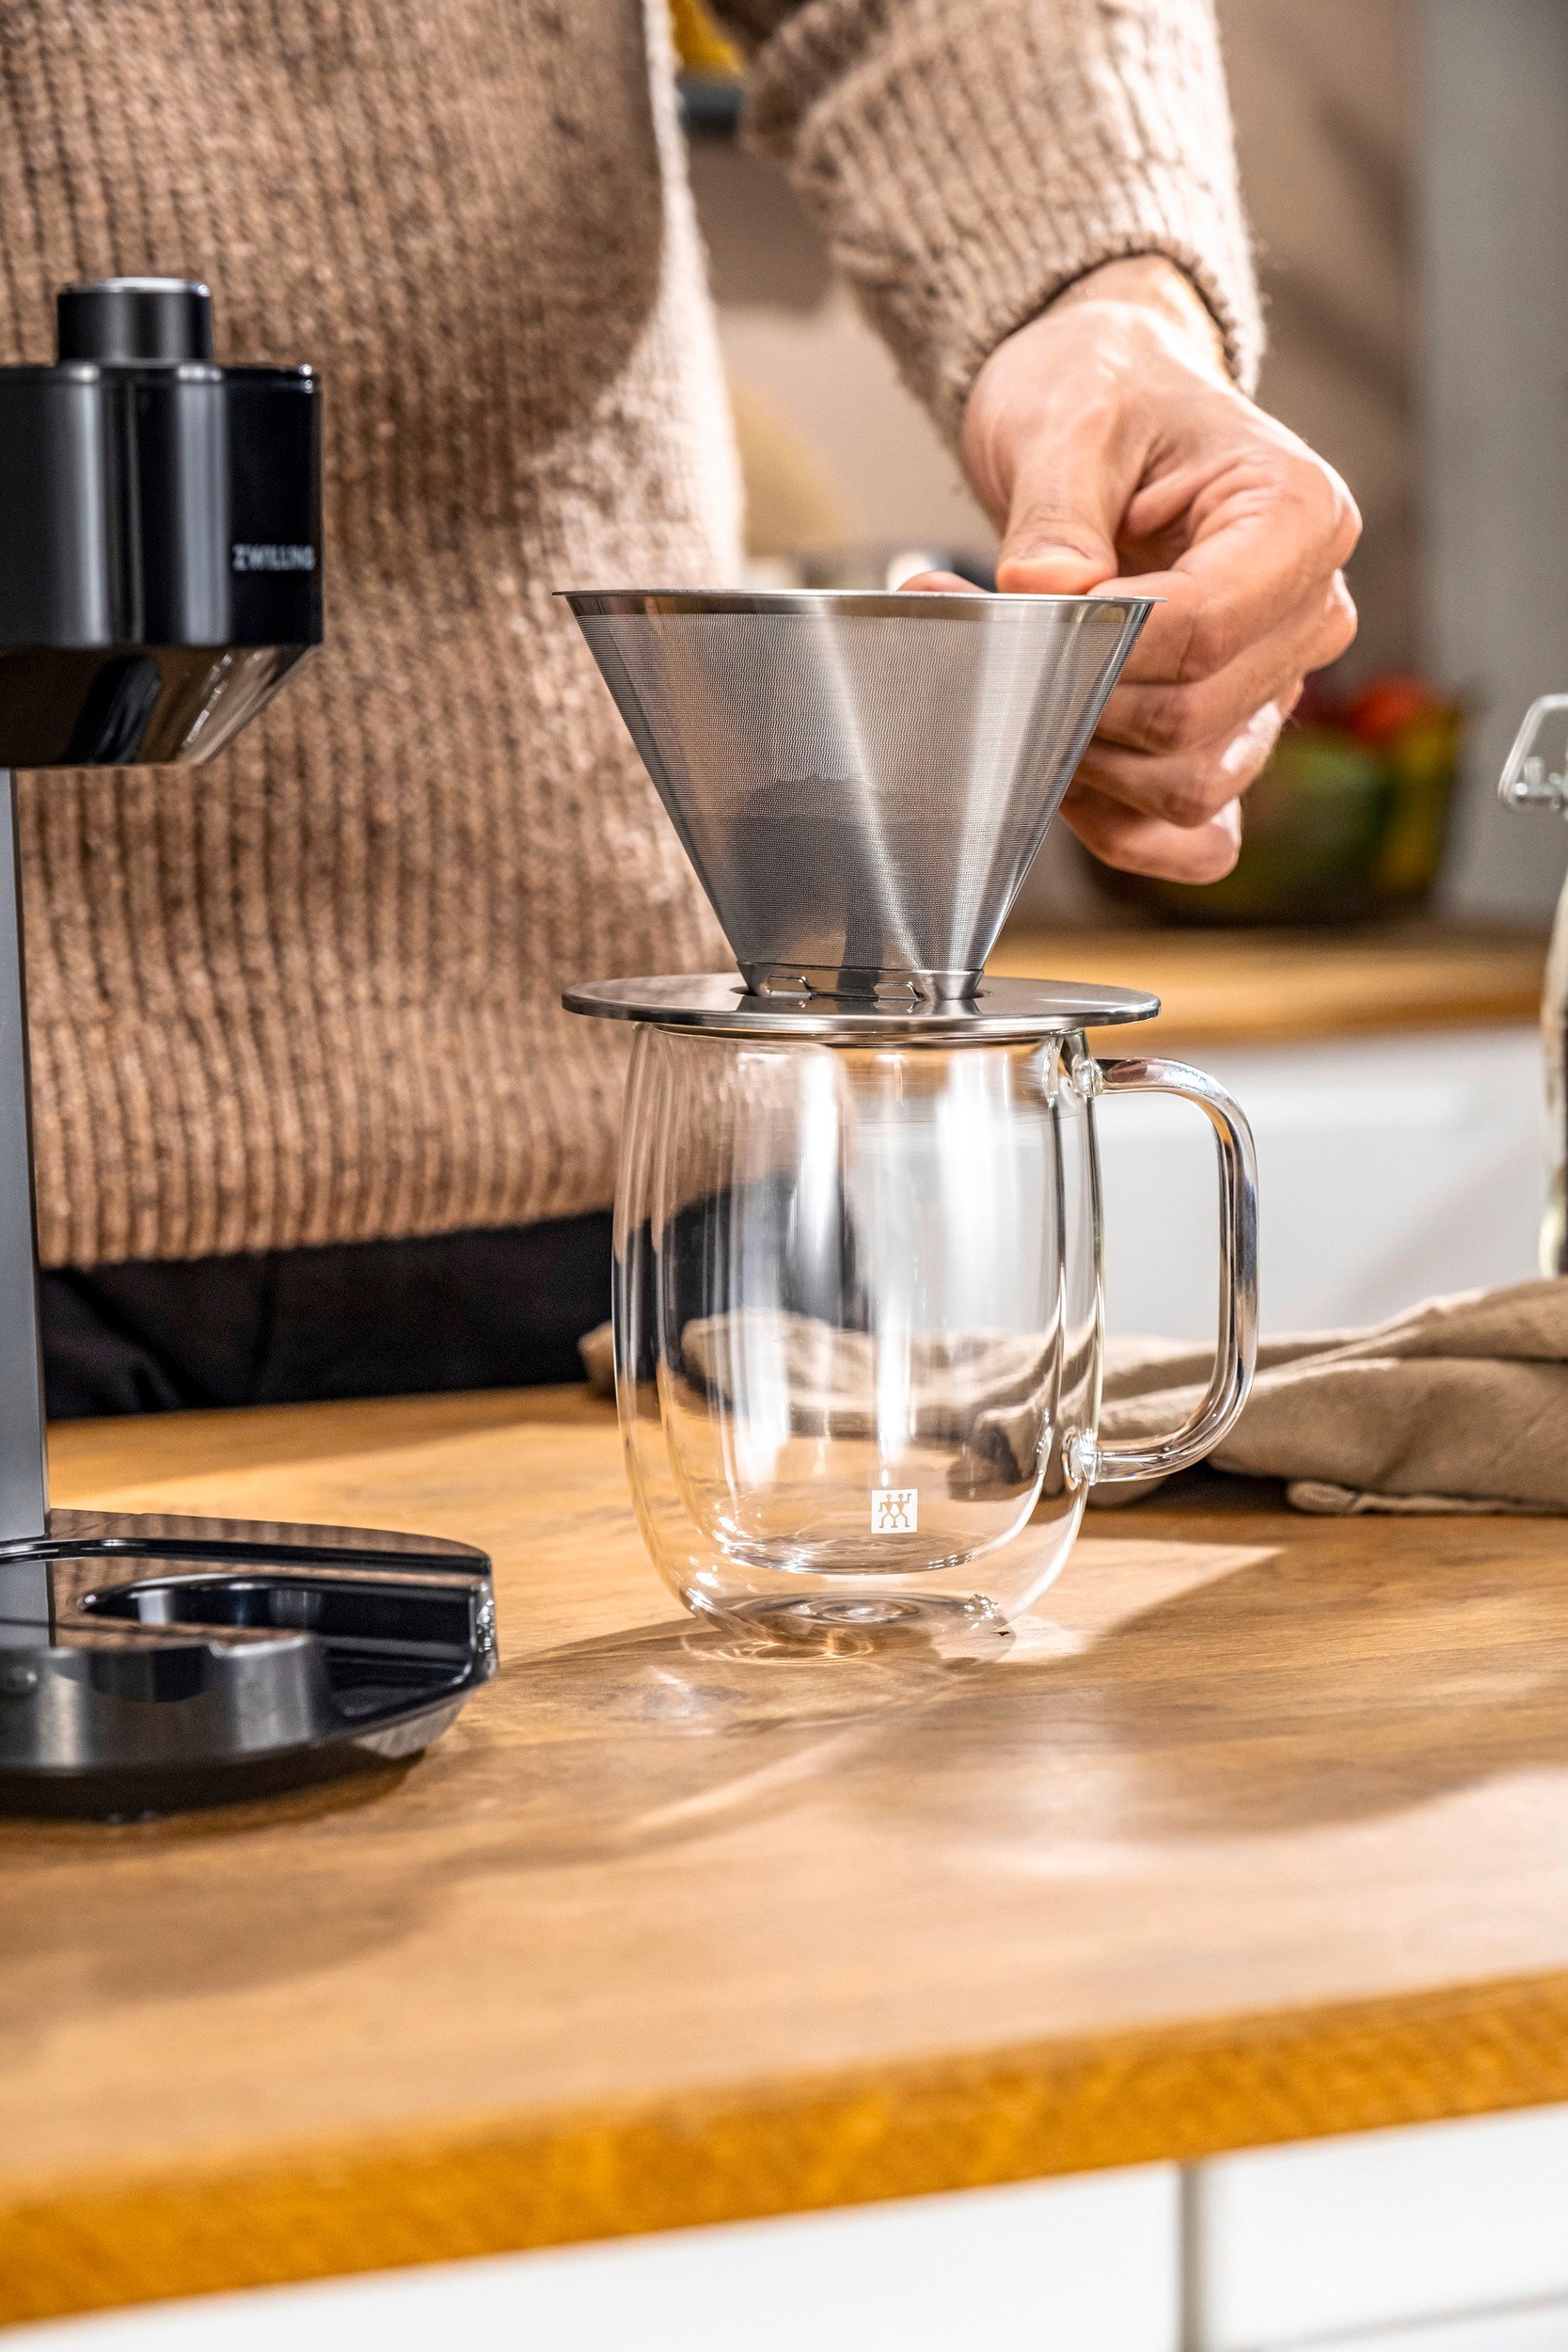 https://3fa-media.com/zwilling/zwilling-zwilling-dripper-for-coffee__138279_f940575-s2500x2500.jpg